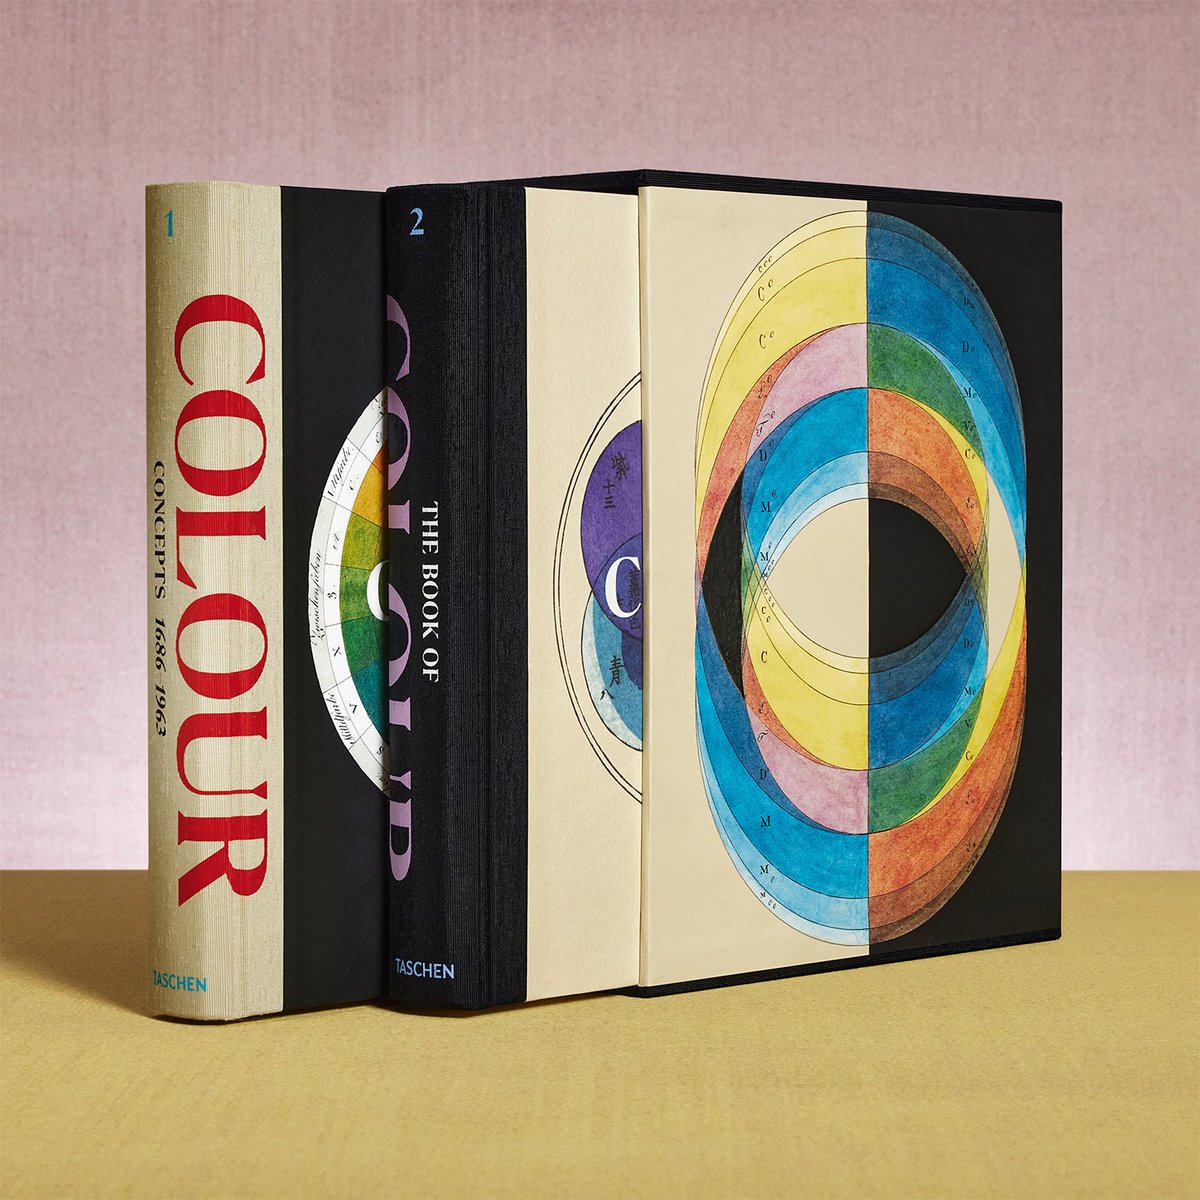 On the occasion of the publication of The Book of Colour Concepts (@TASCHEN) I was invited to pick five of the best books on colour for the May issue of @TheArtNewspaper . Historical books not included, it was nonetheless a tough call. Guess who is on the list?